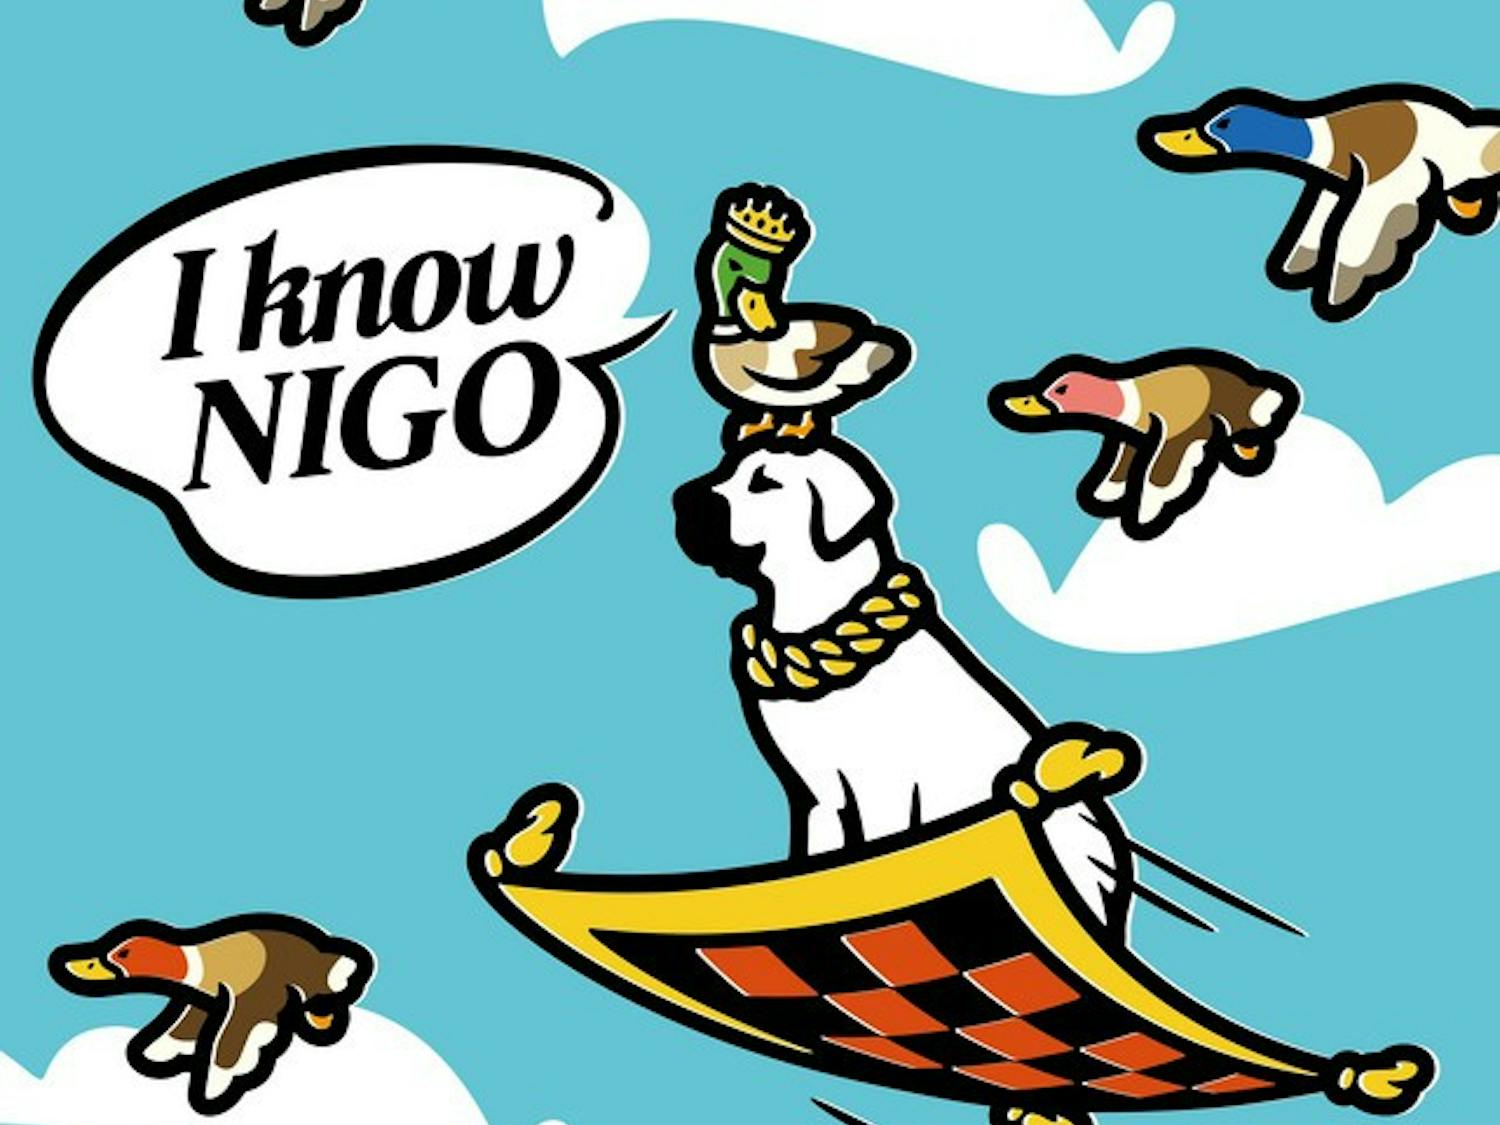 The cover art for “I Know Nigo!” featuring Pharrell, A$AP Rocky, Kid Cudy and Pusha T.